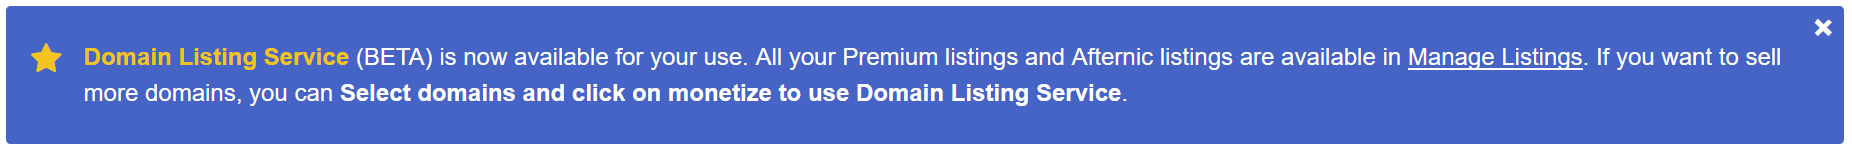 GD Domain Listing Service Notice.png